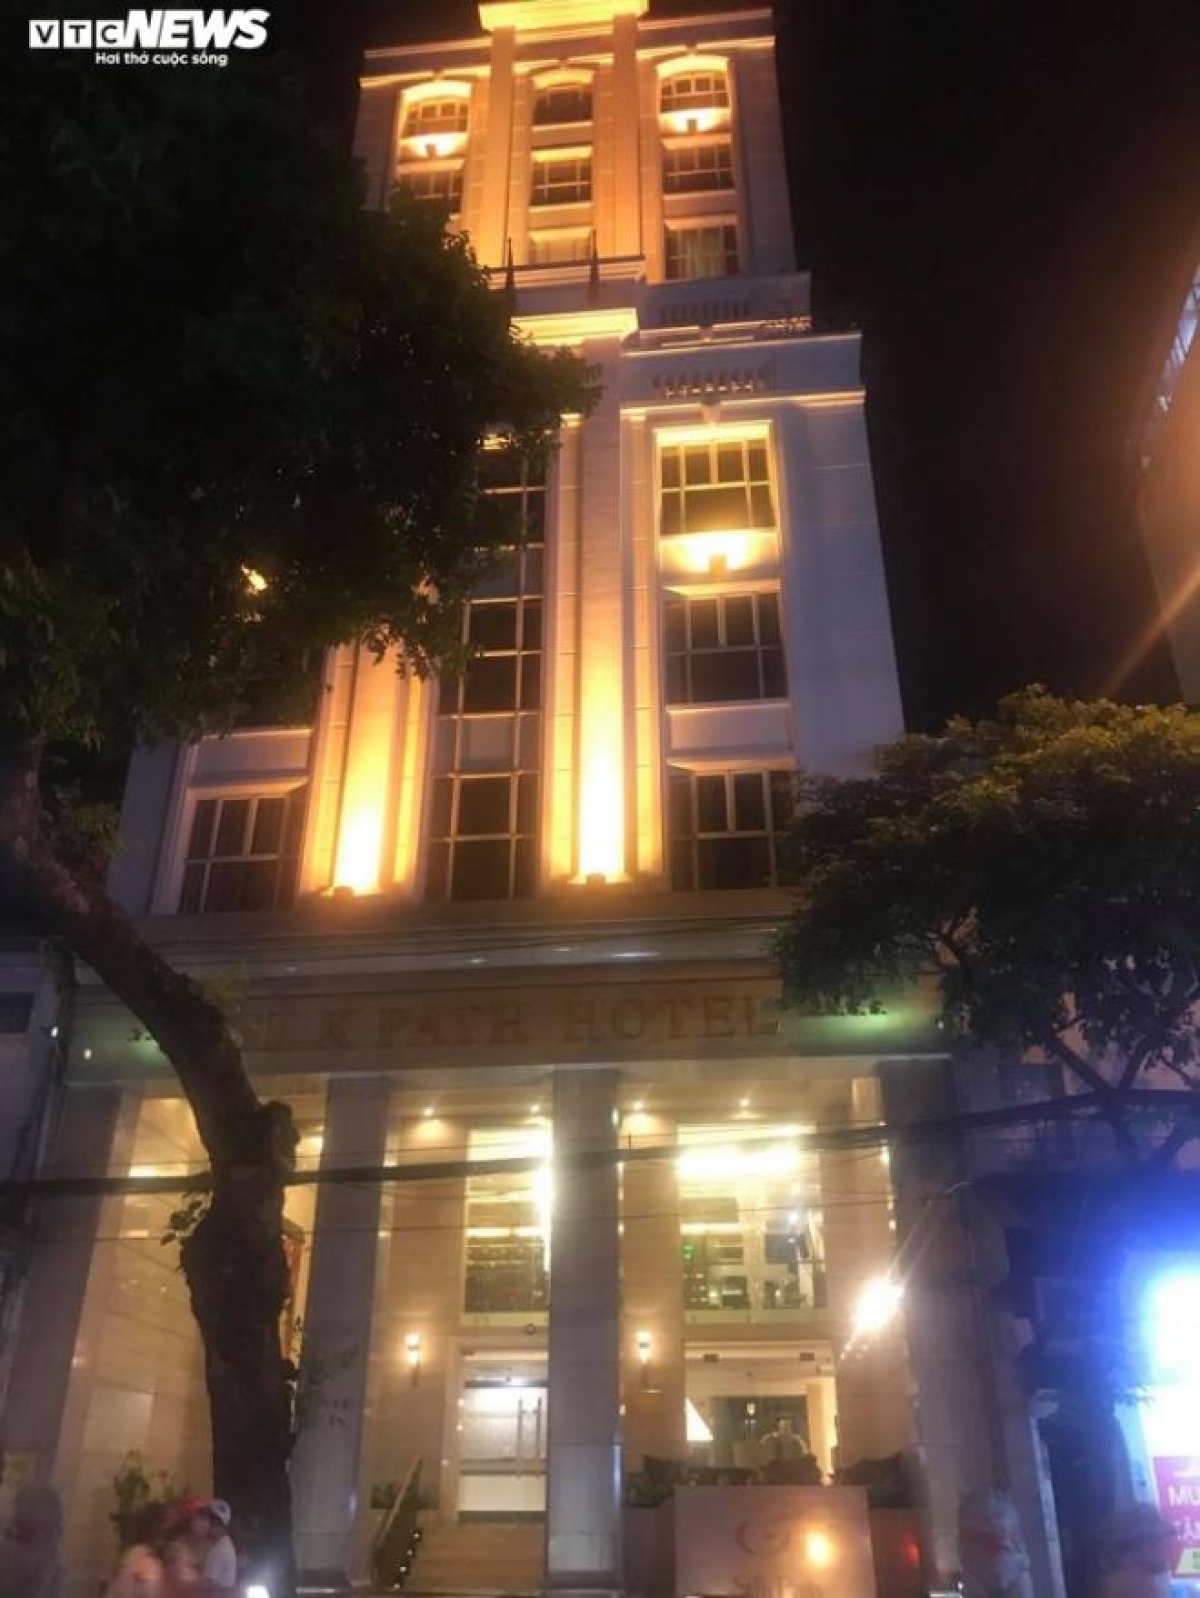 A hotel located on Hang Bong street remains open, despite there being no sign of any guests.